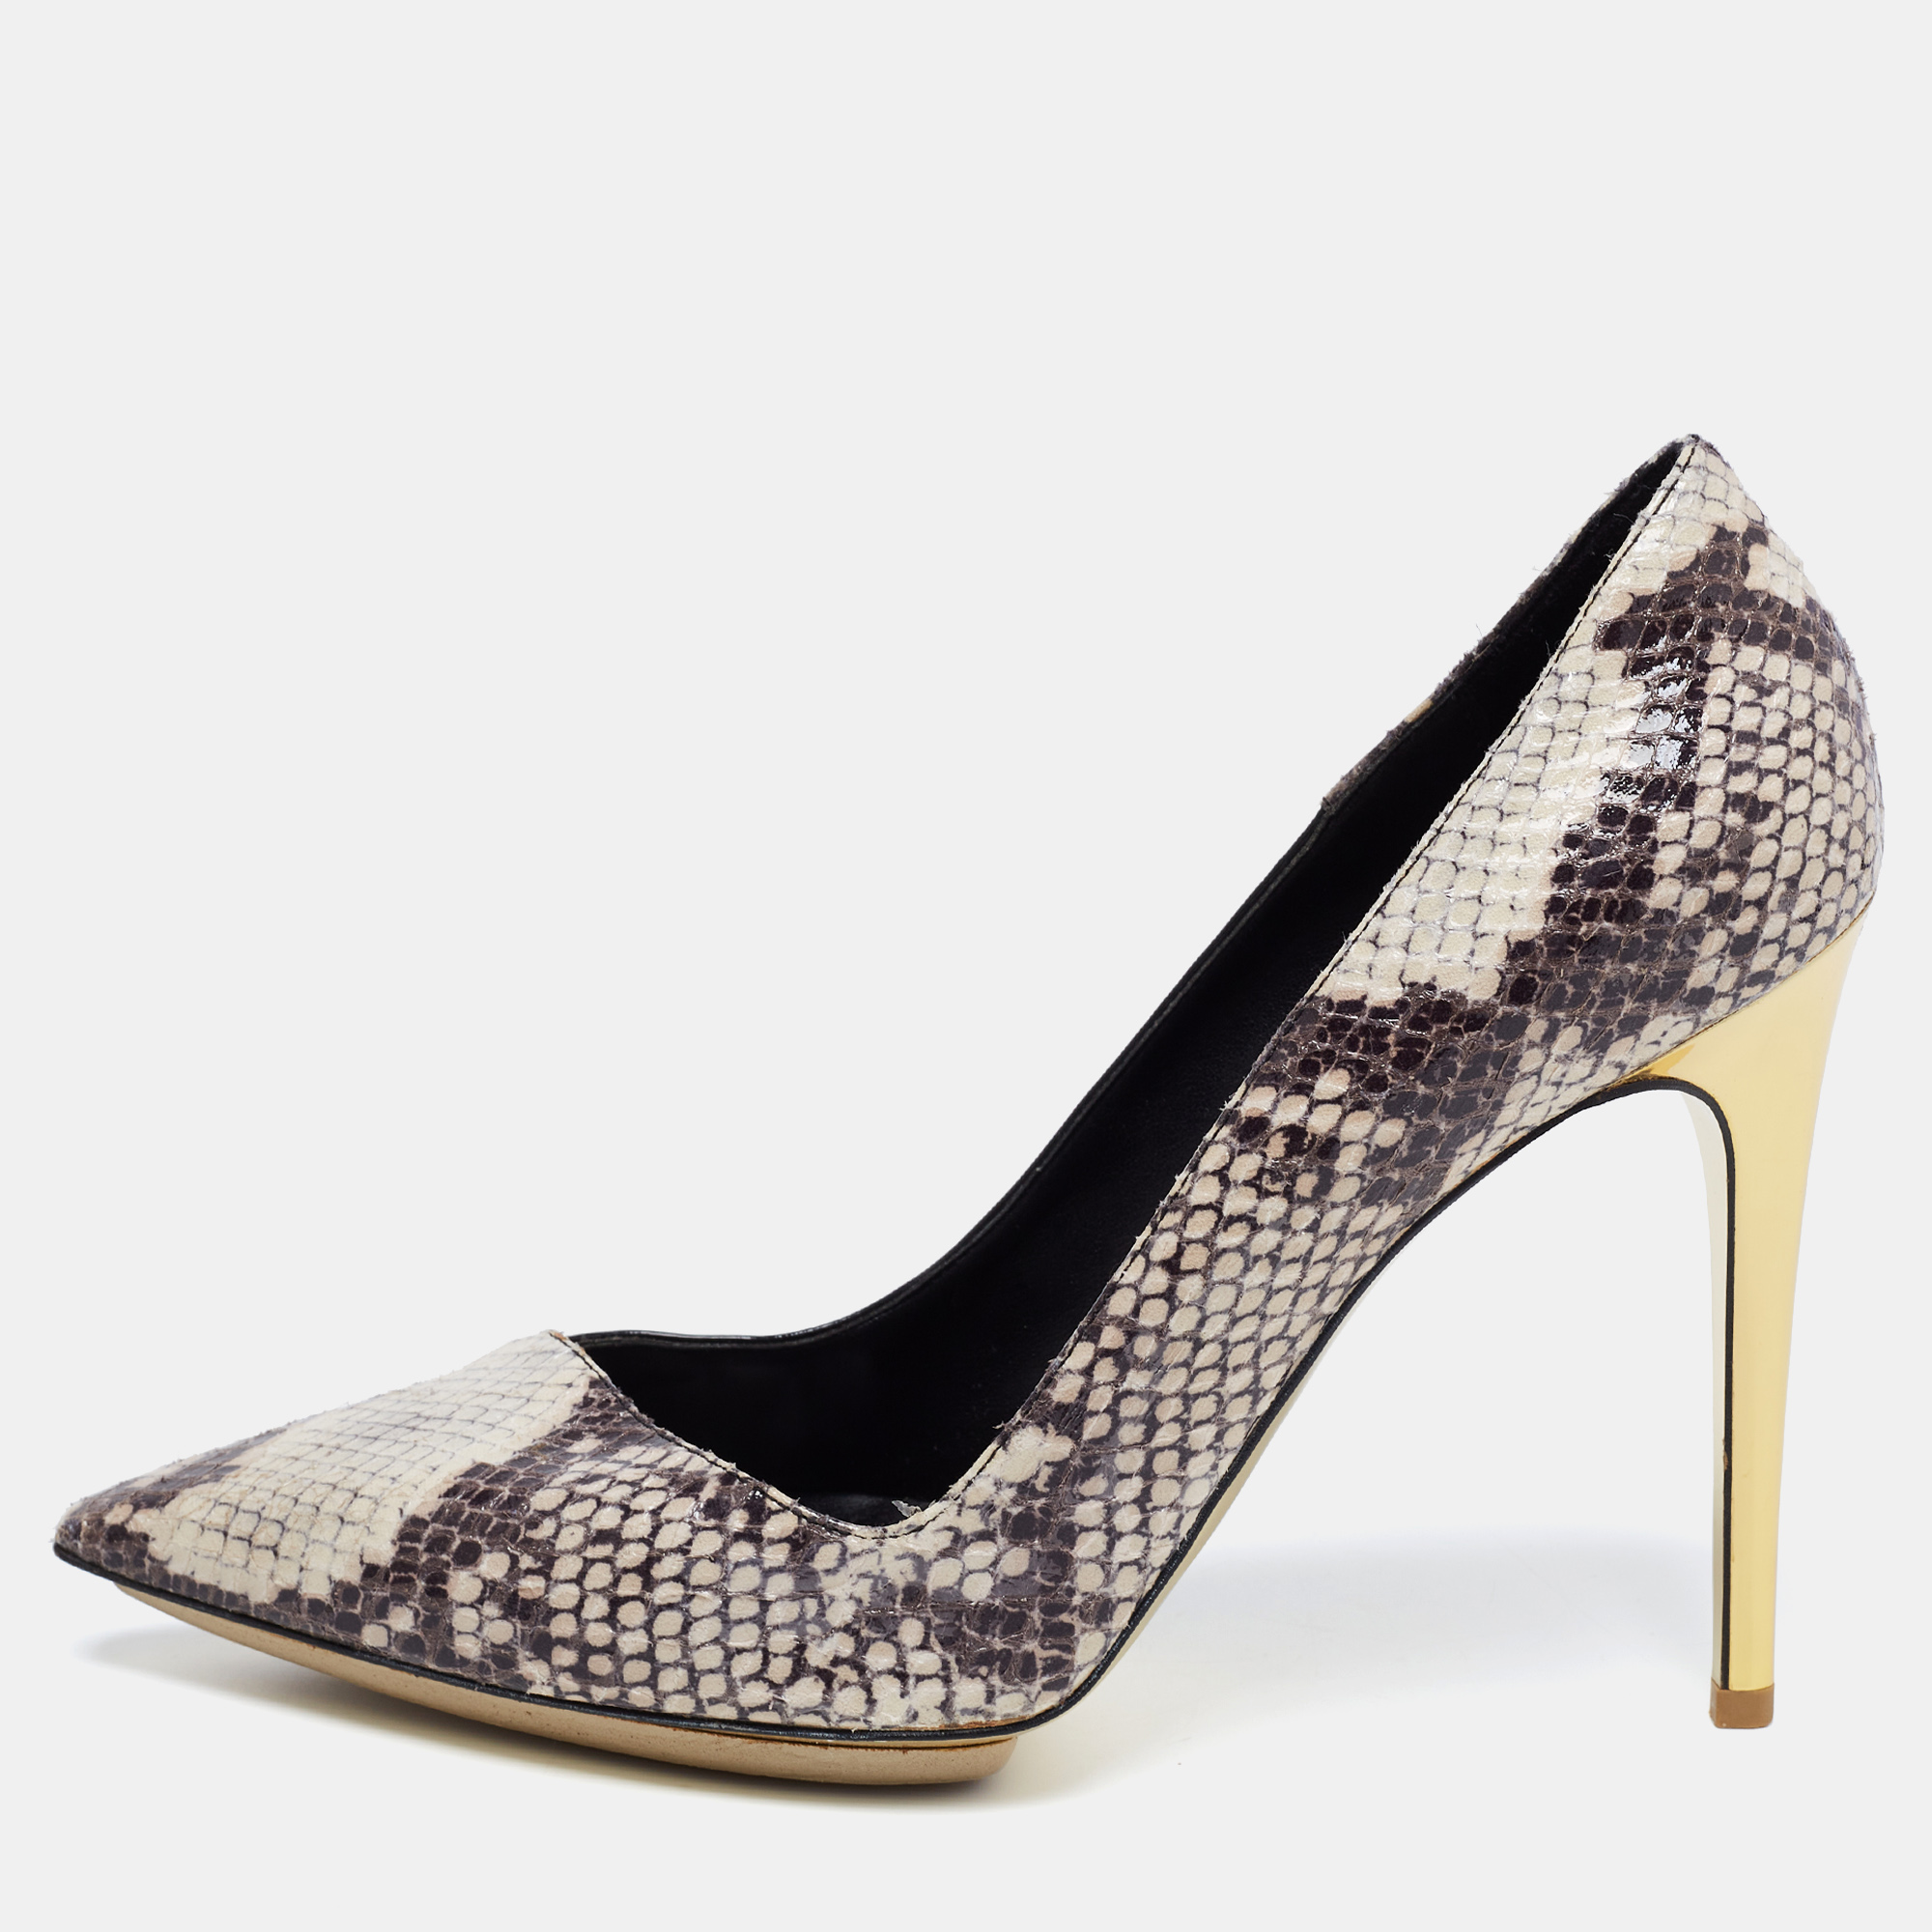 Stella McCartney Tri Color Faux Patent And Snakeskin Embossed Leather D'orsay Pumps Size 38.5